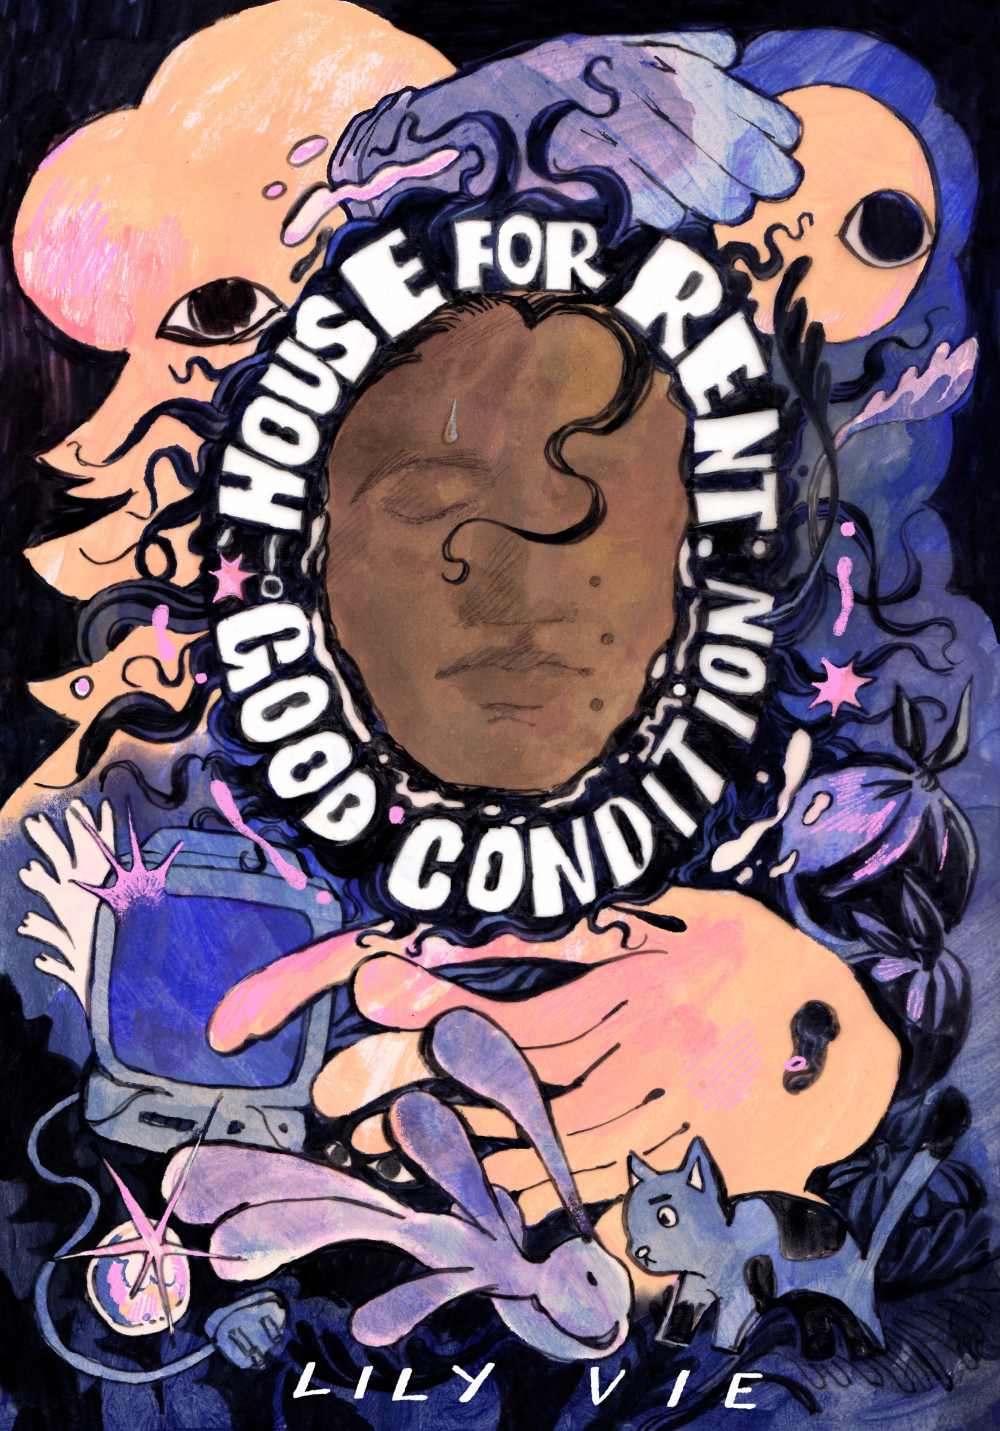 House for Rent comic cover